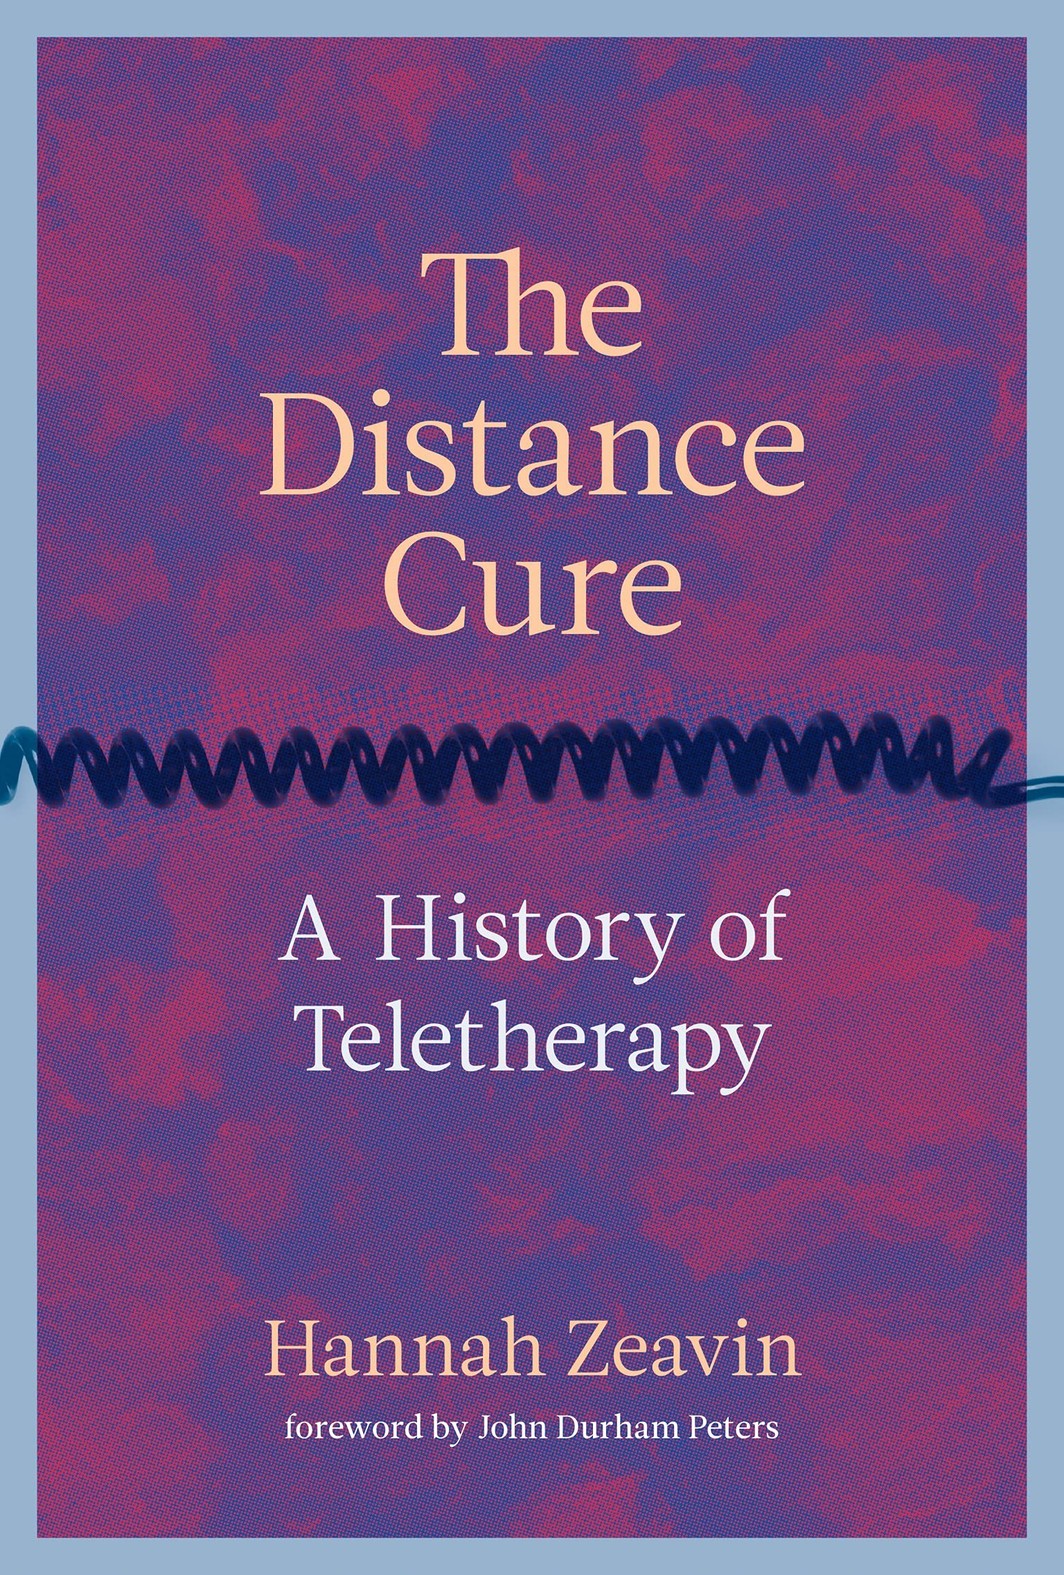 The cover of The distance cure: a history of teletherapy